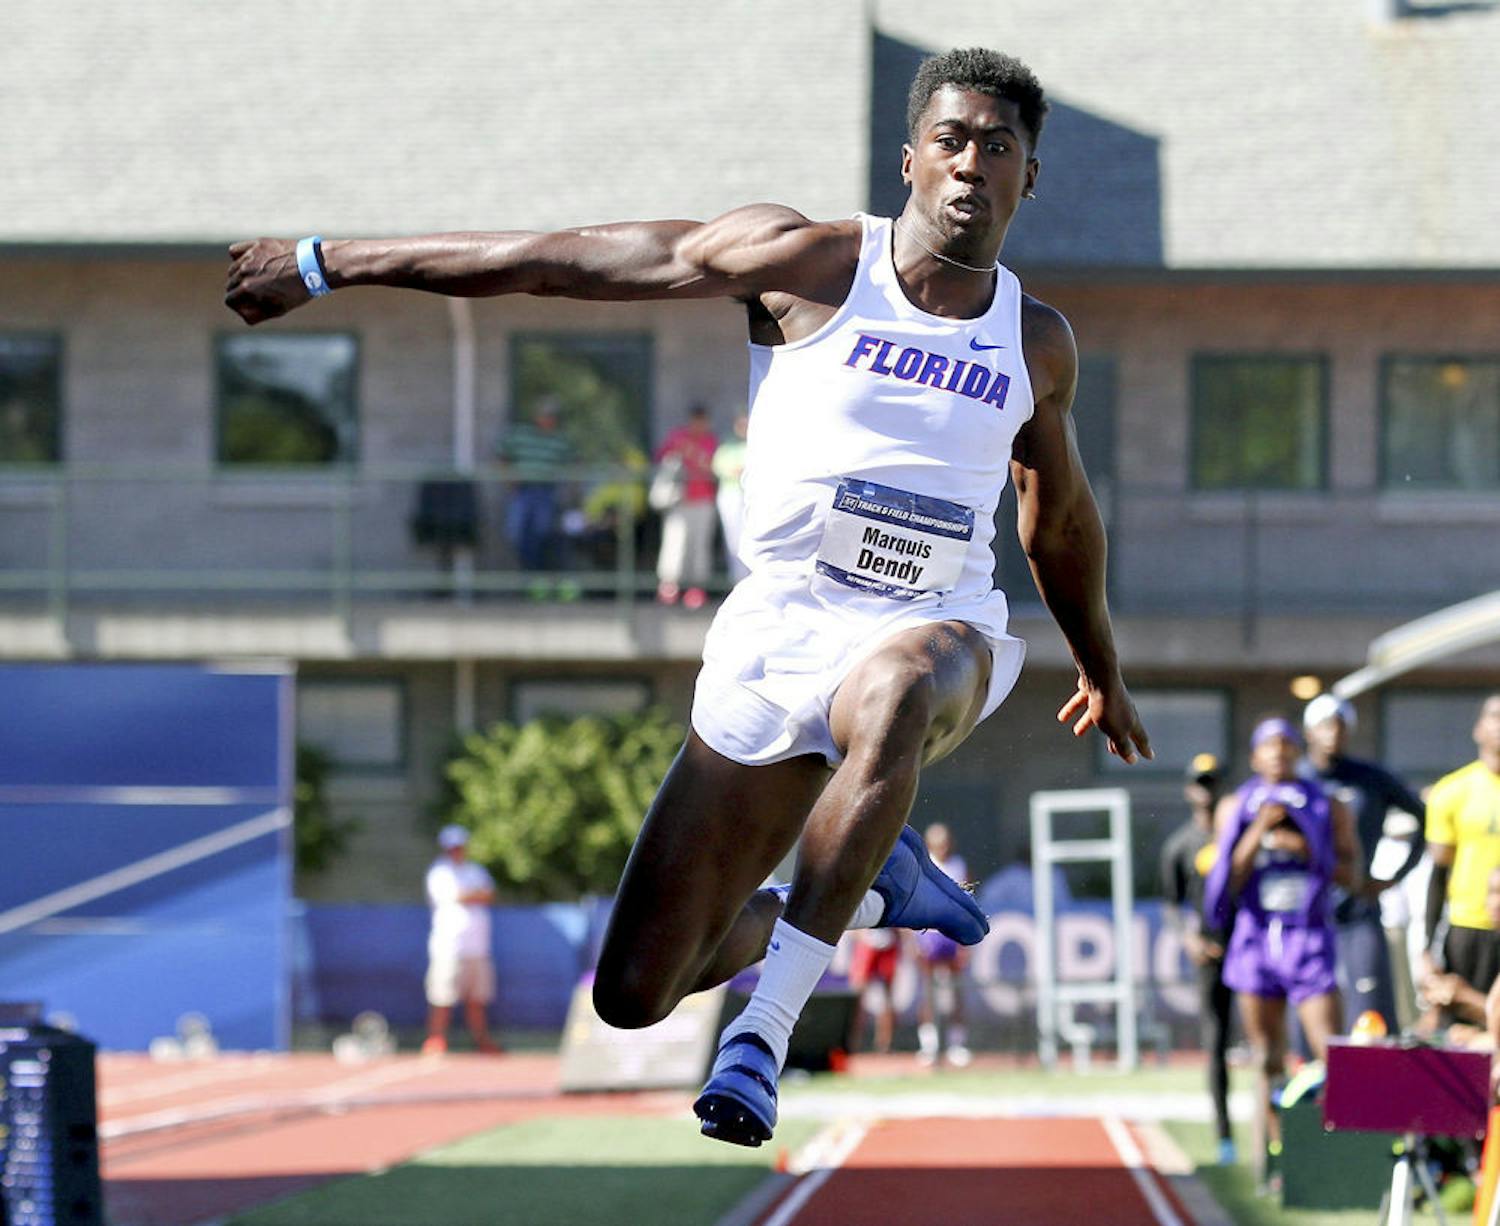 Florida's Marquis Dendy leaps on his way to winning the triple jump during the NCAA track and field championships in Eugene, Ore., Friday, June 12, 2015.